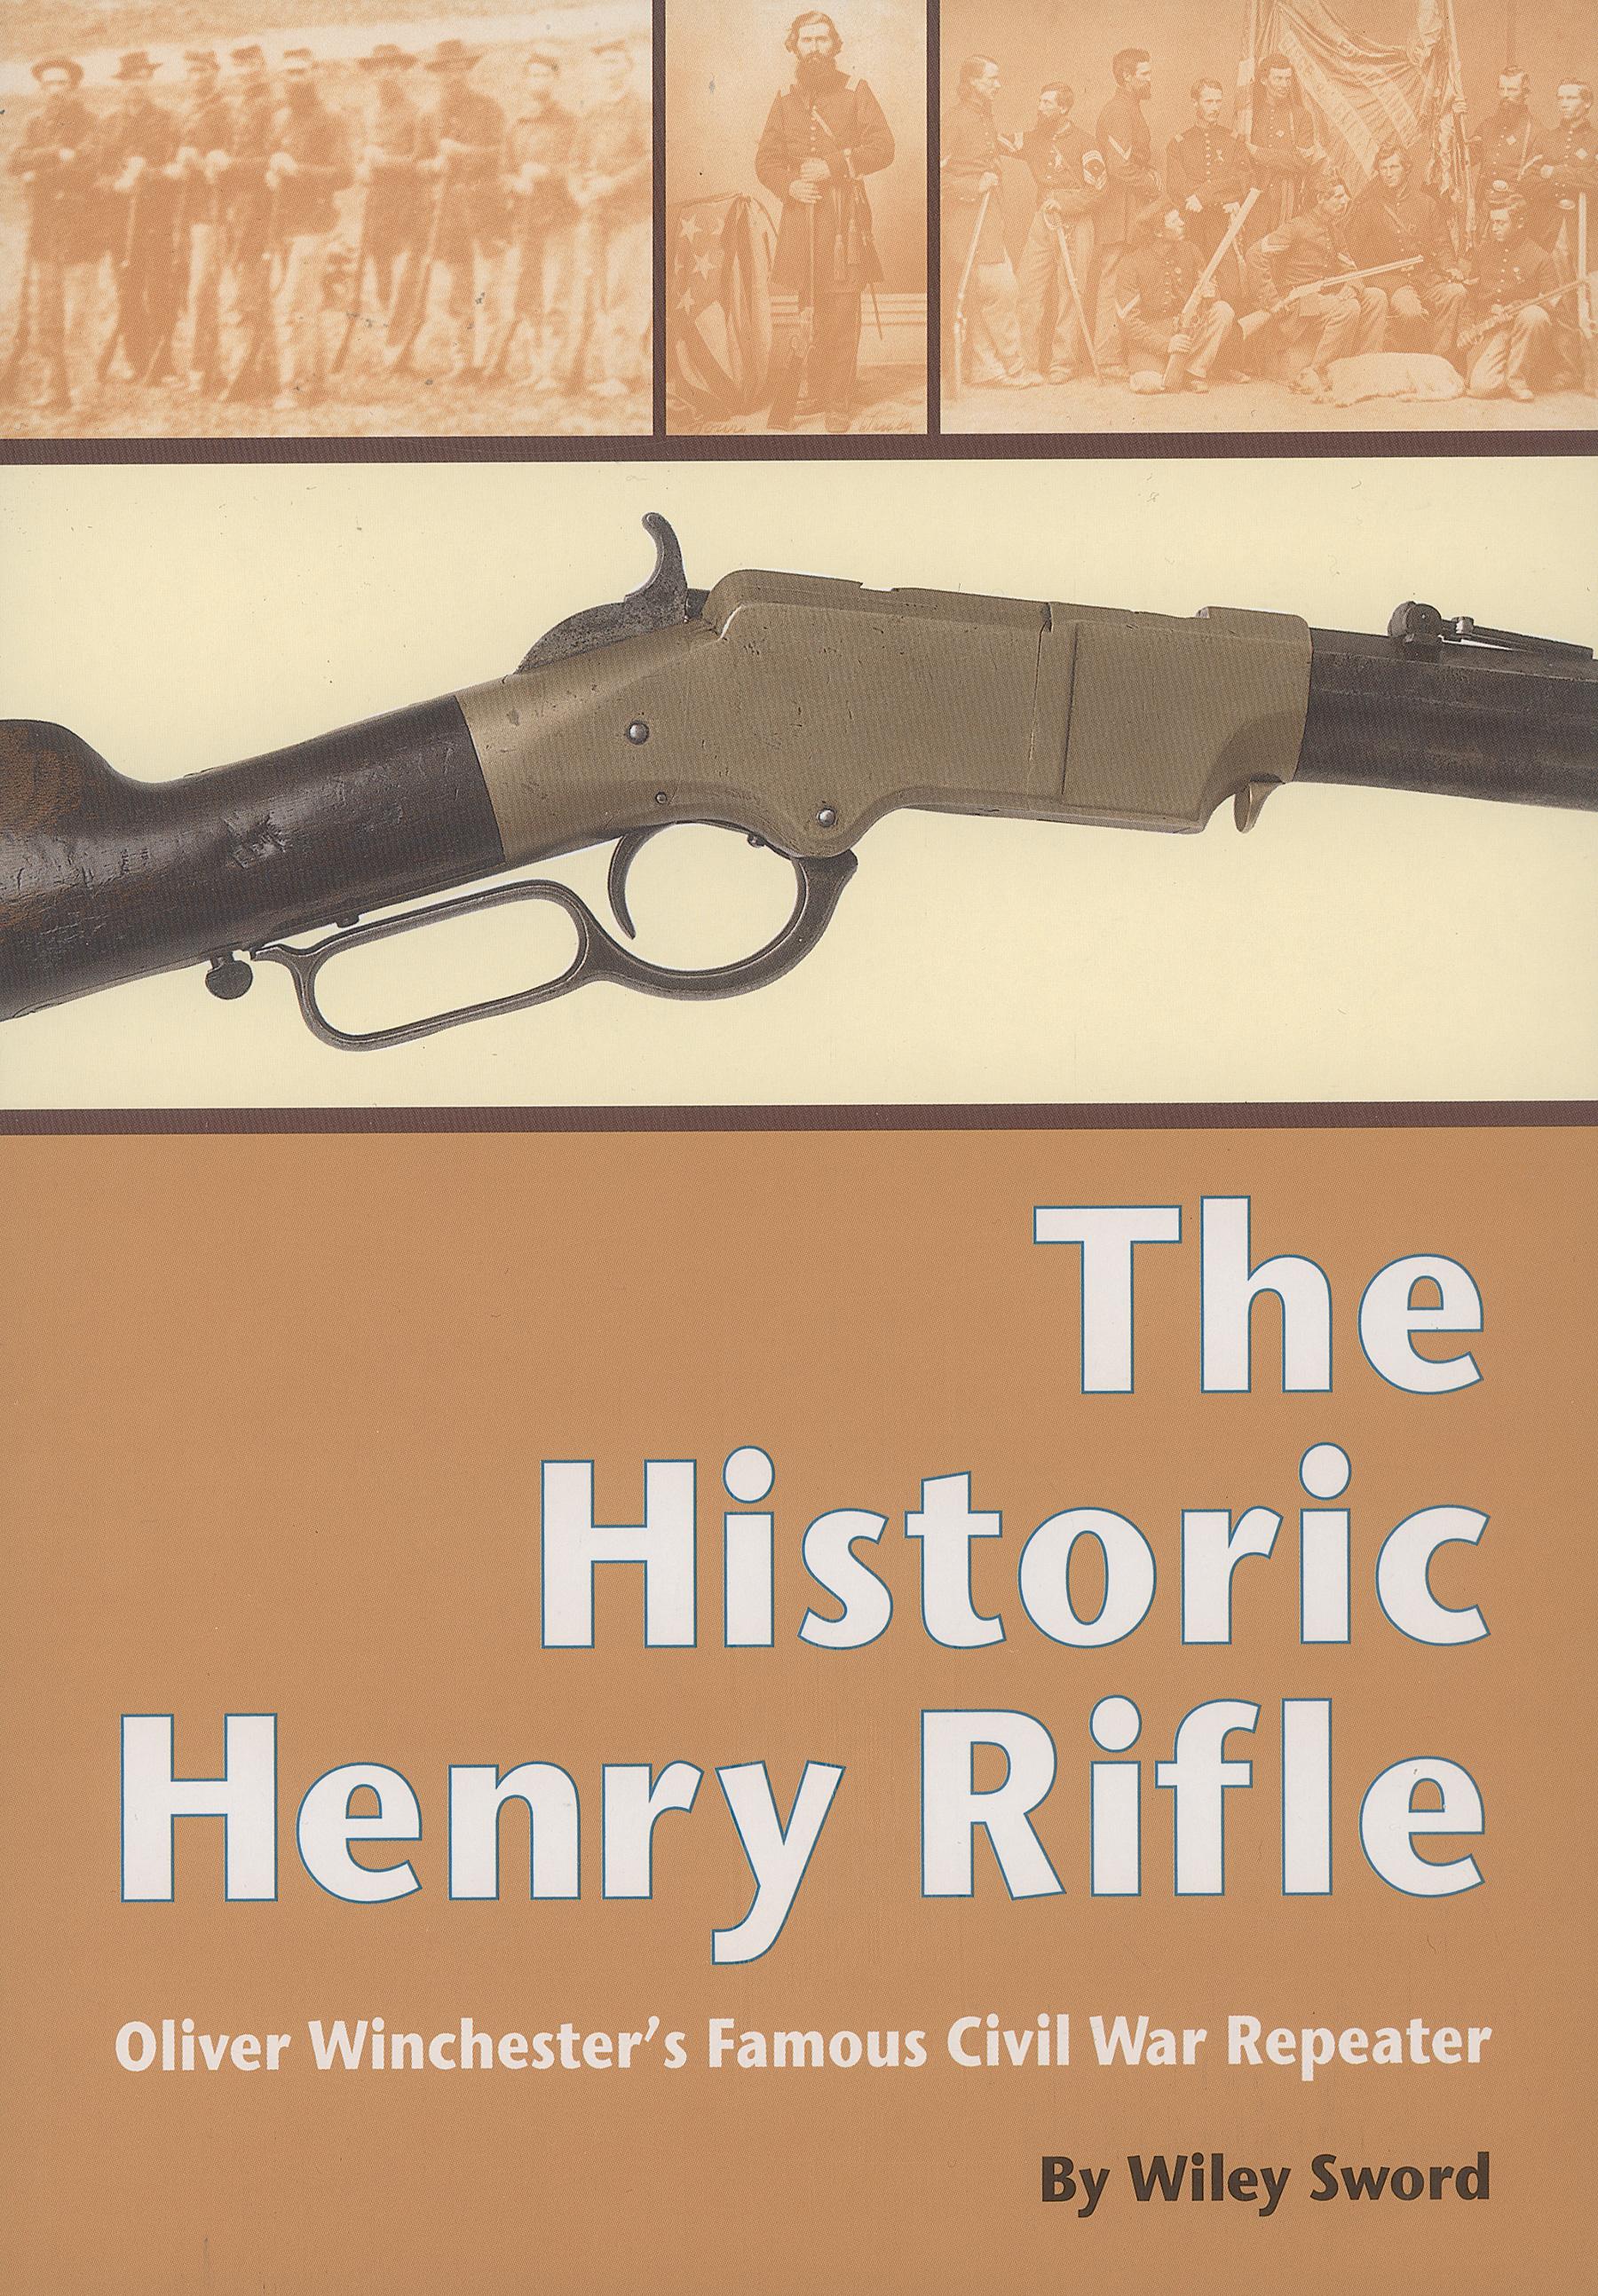 U.S. Henry Rifle Documented to the 97th Indiana Infantry Regt.